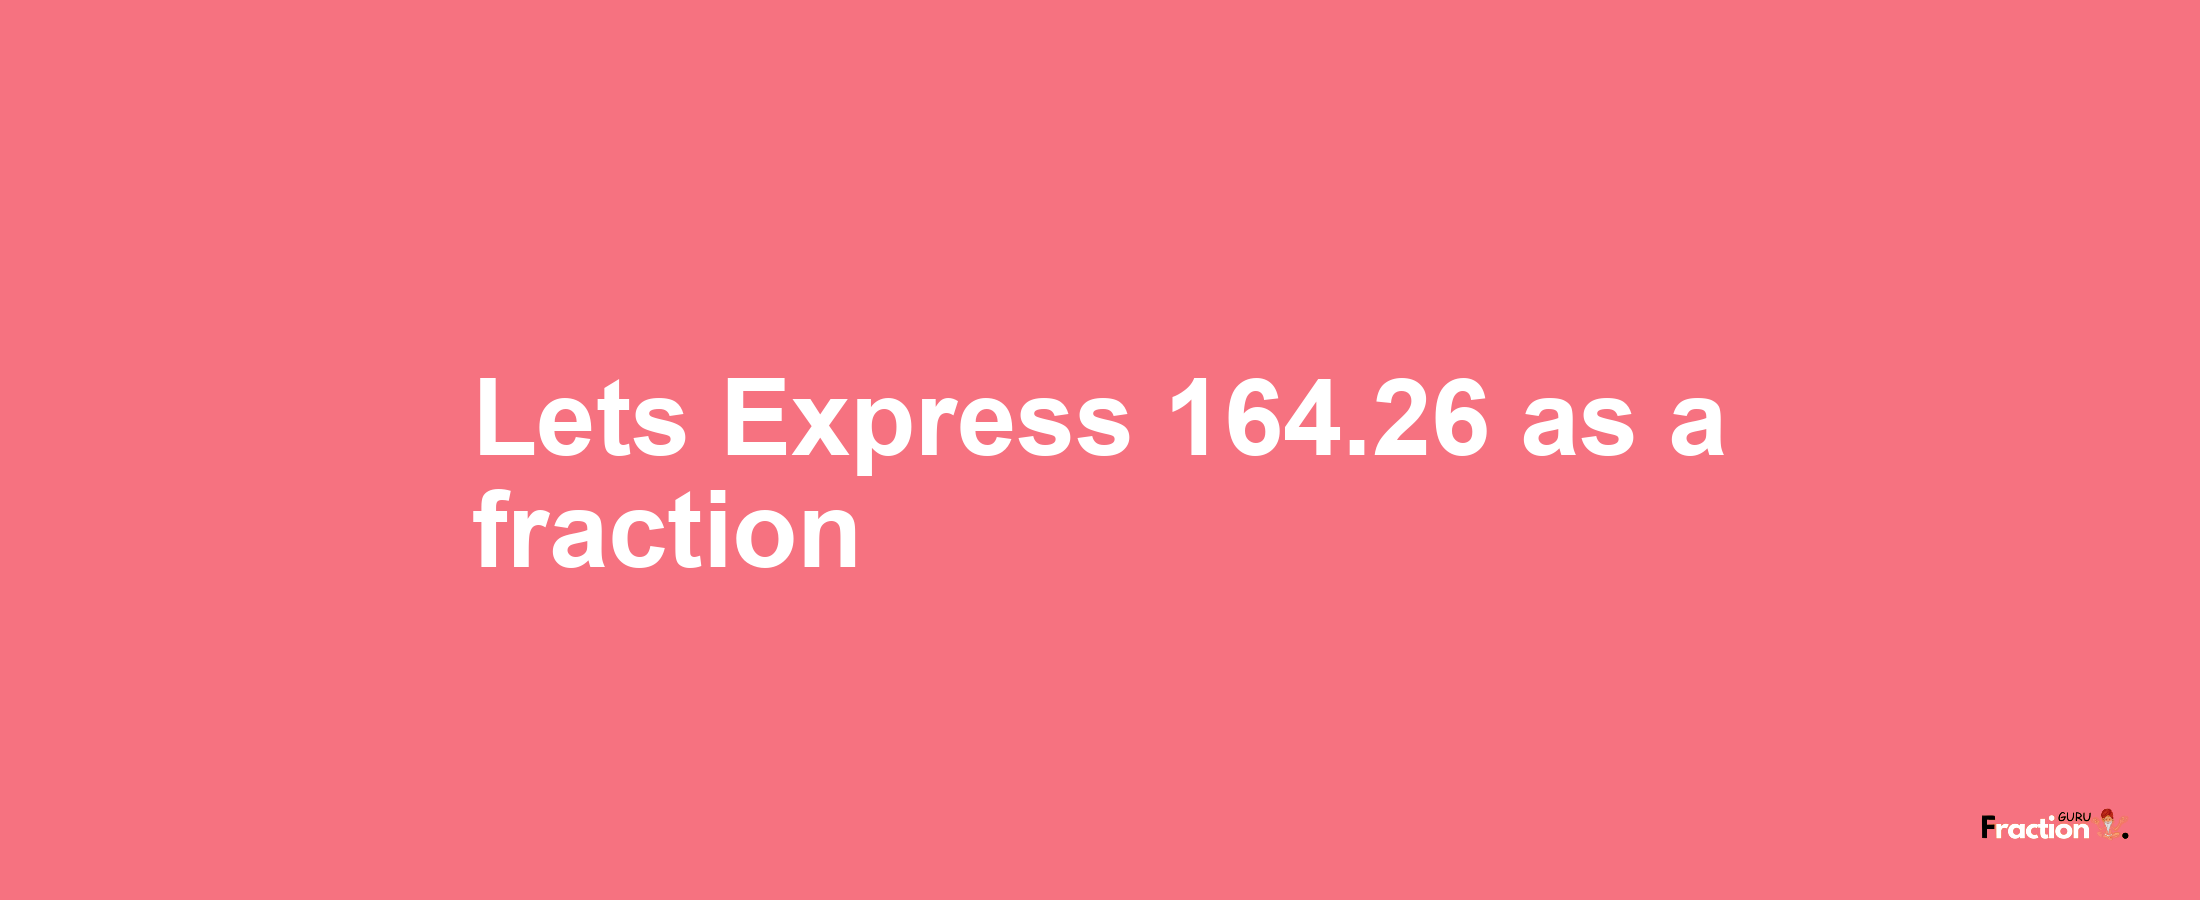 Lets Express 164.26 as afraction